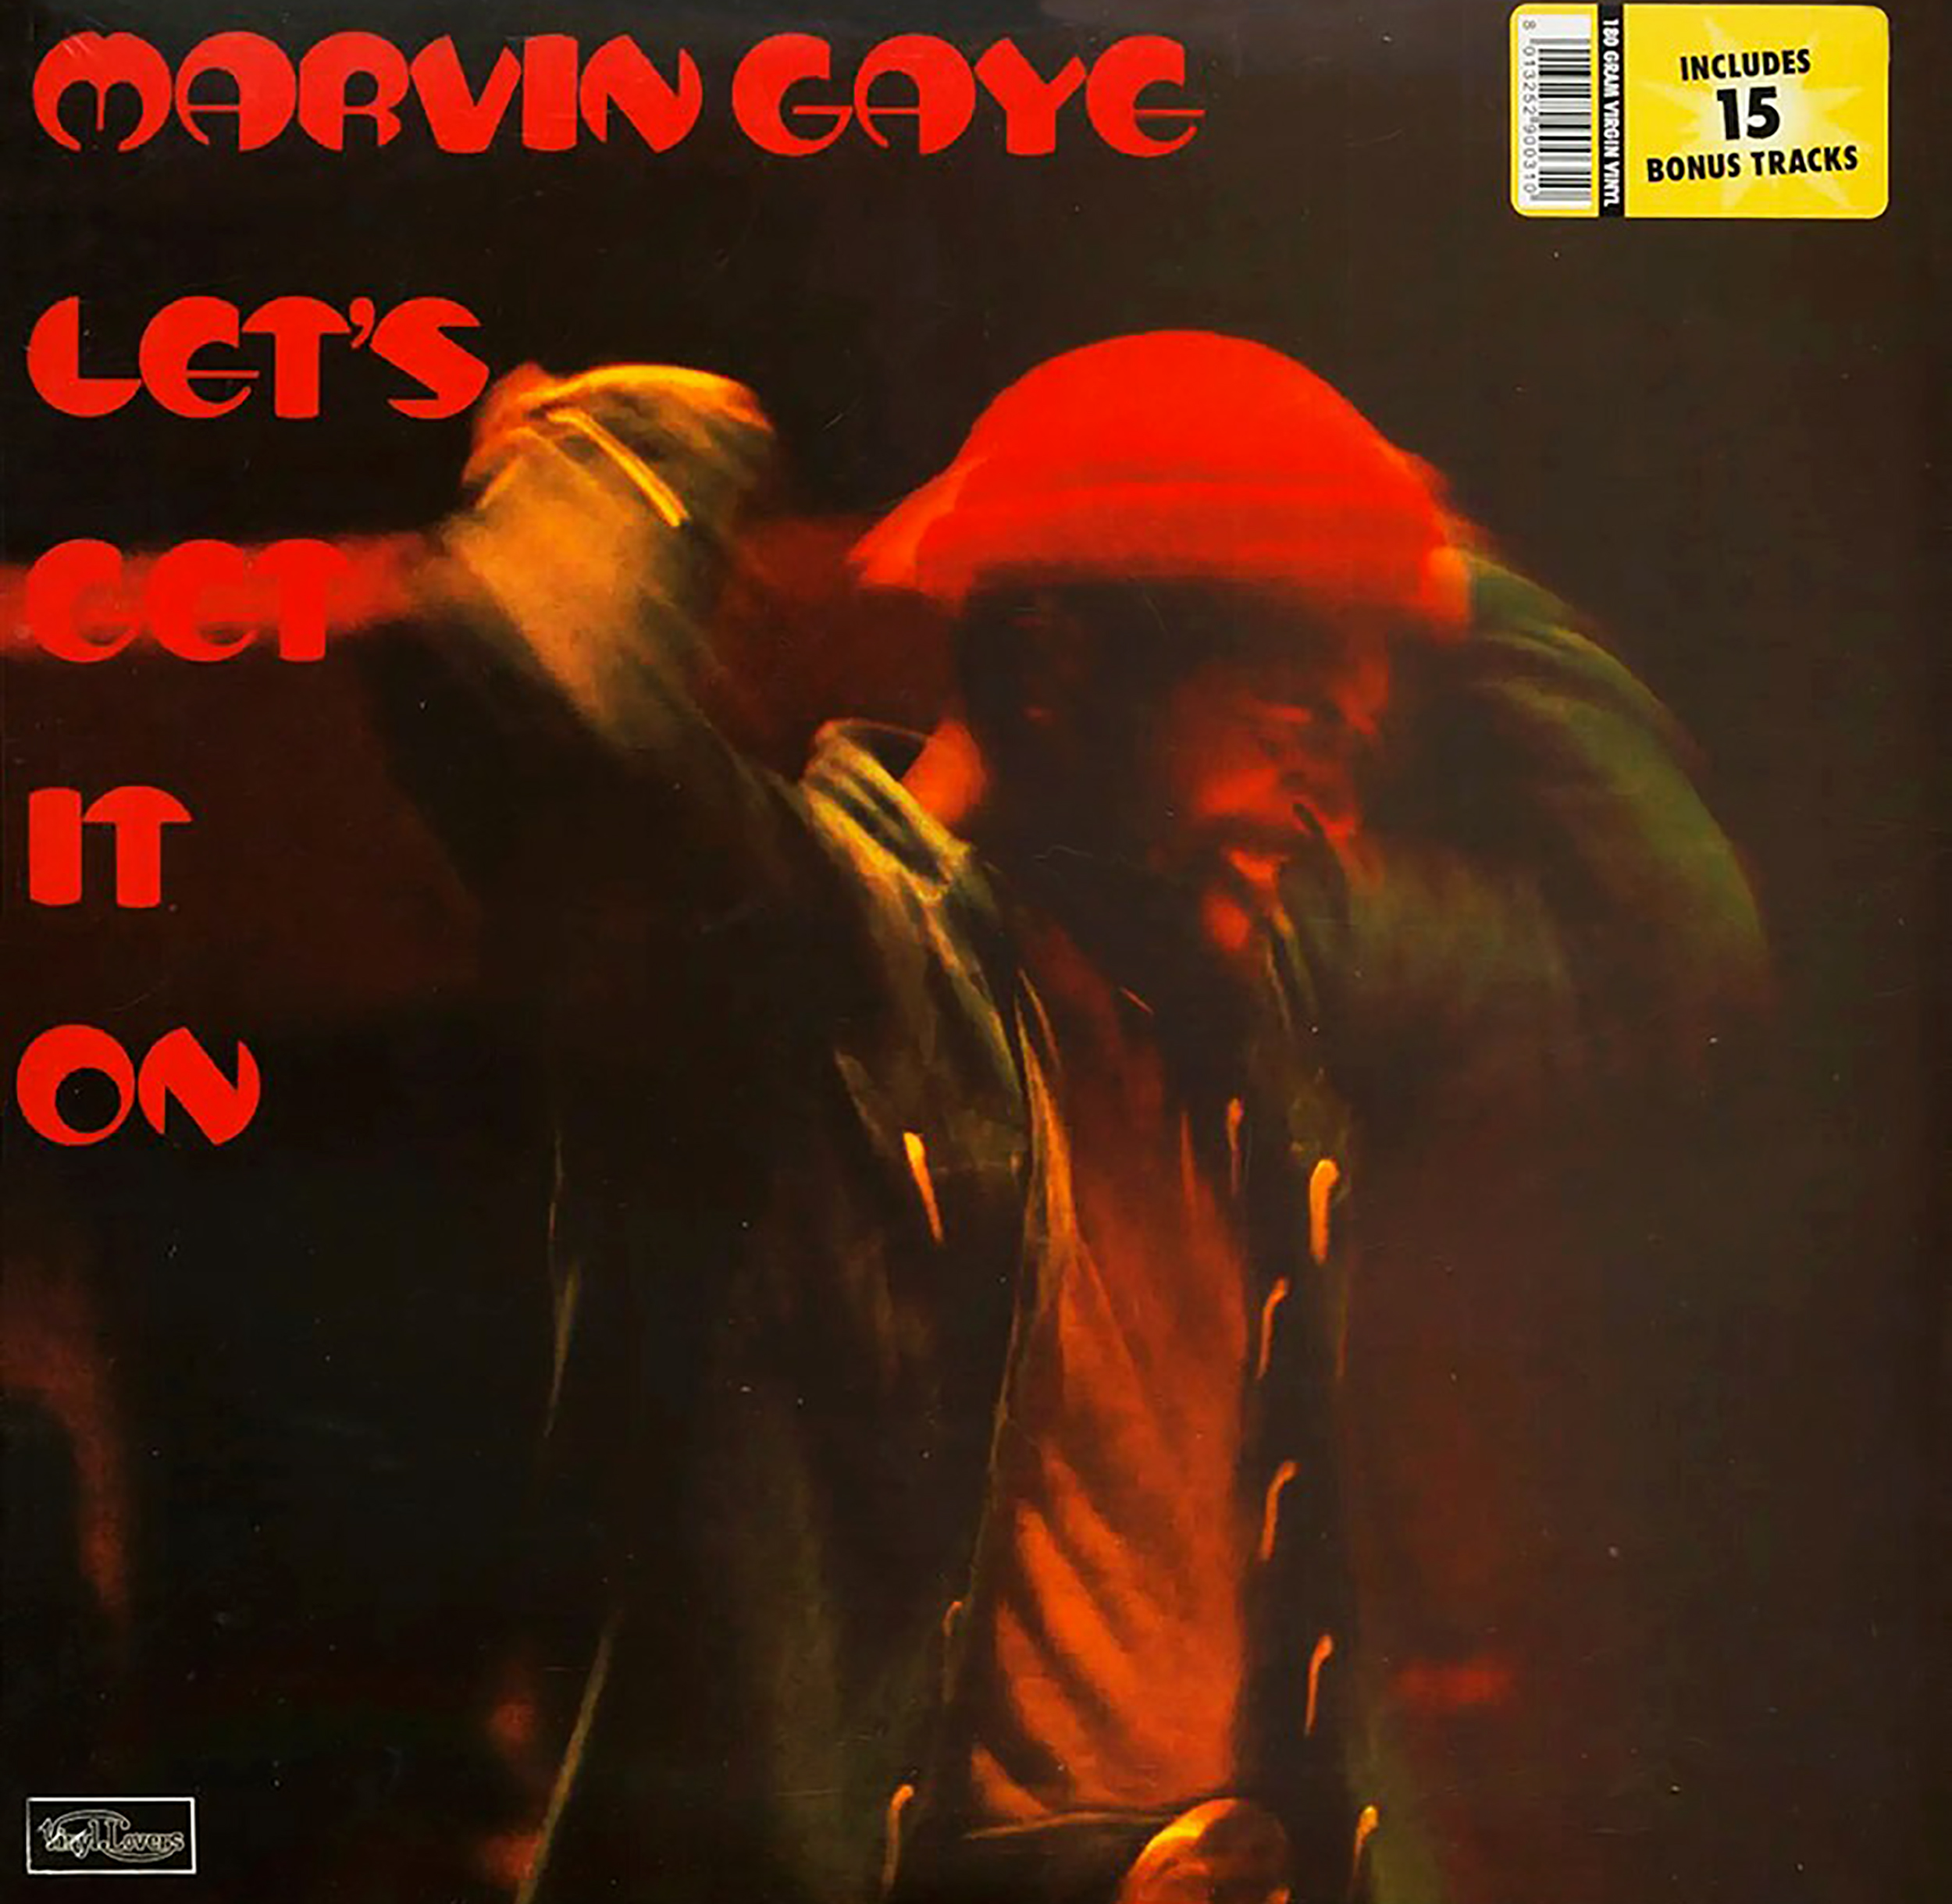 The 50-year legacy of Marvin Gaye's Let's Get It On